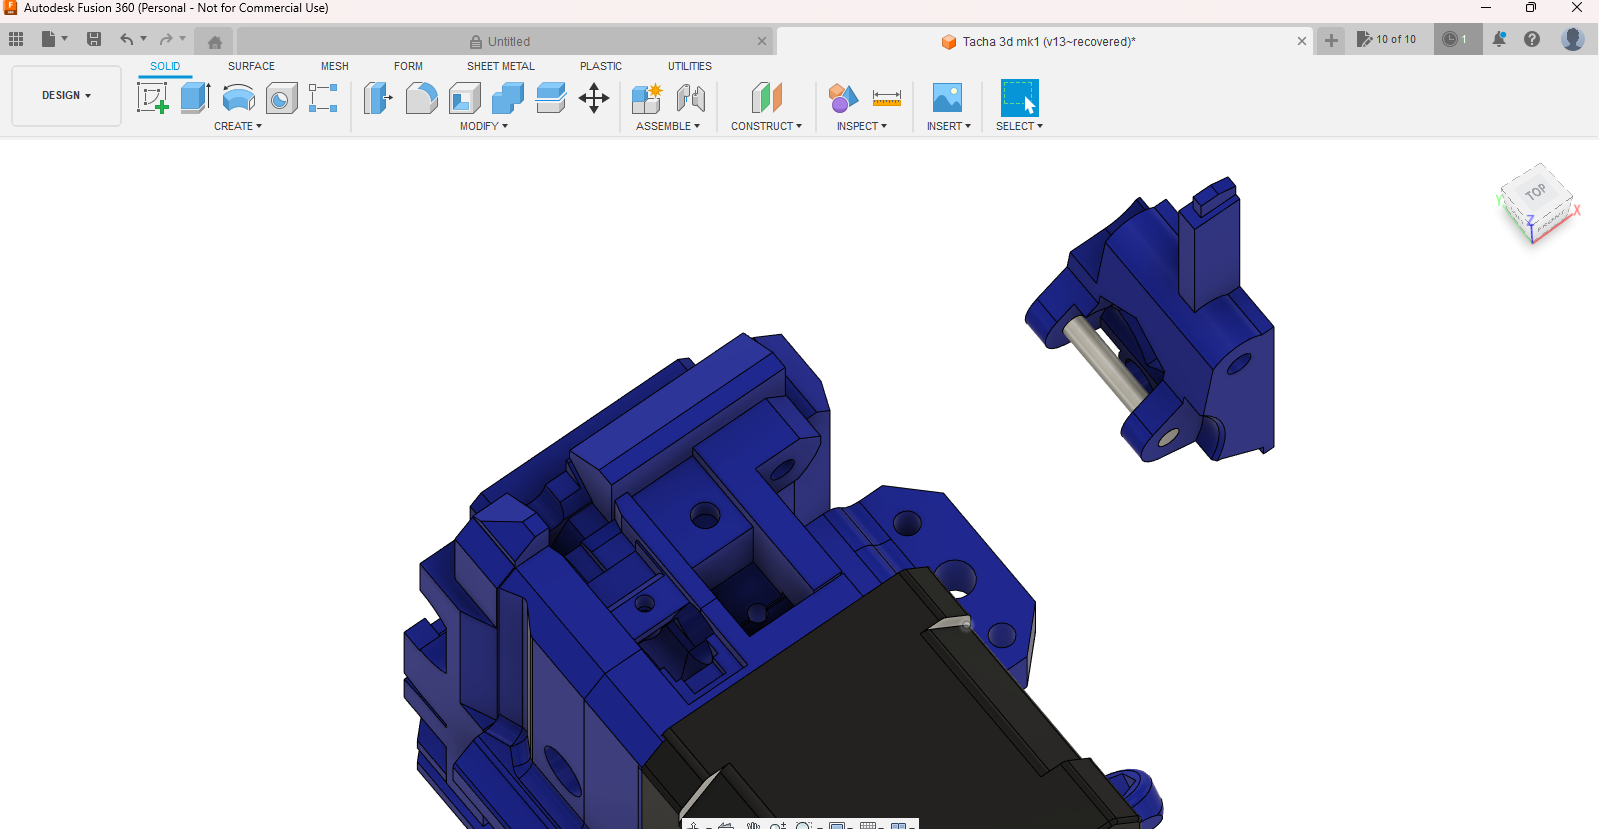 Autodesk Fusion 360 (Personal - Not for Commercial Use) 6_29_2023 10_05_37 PM.png